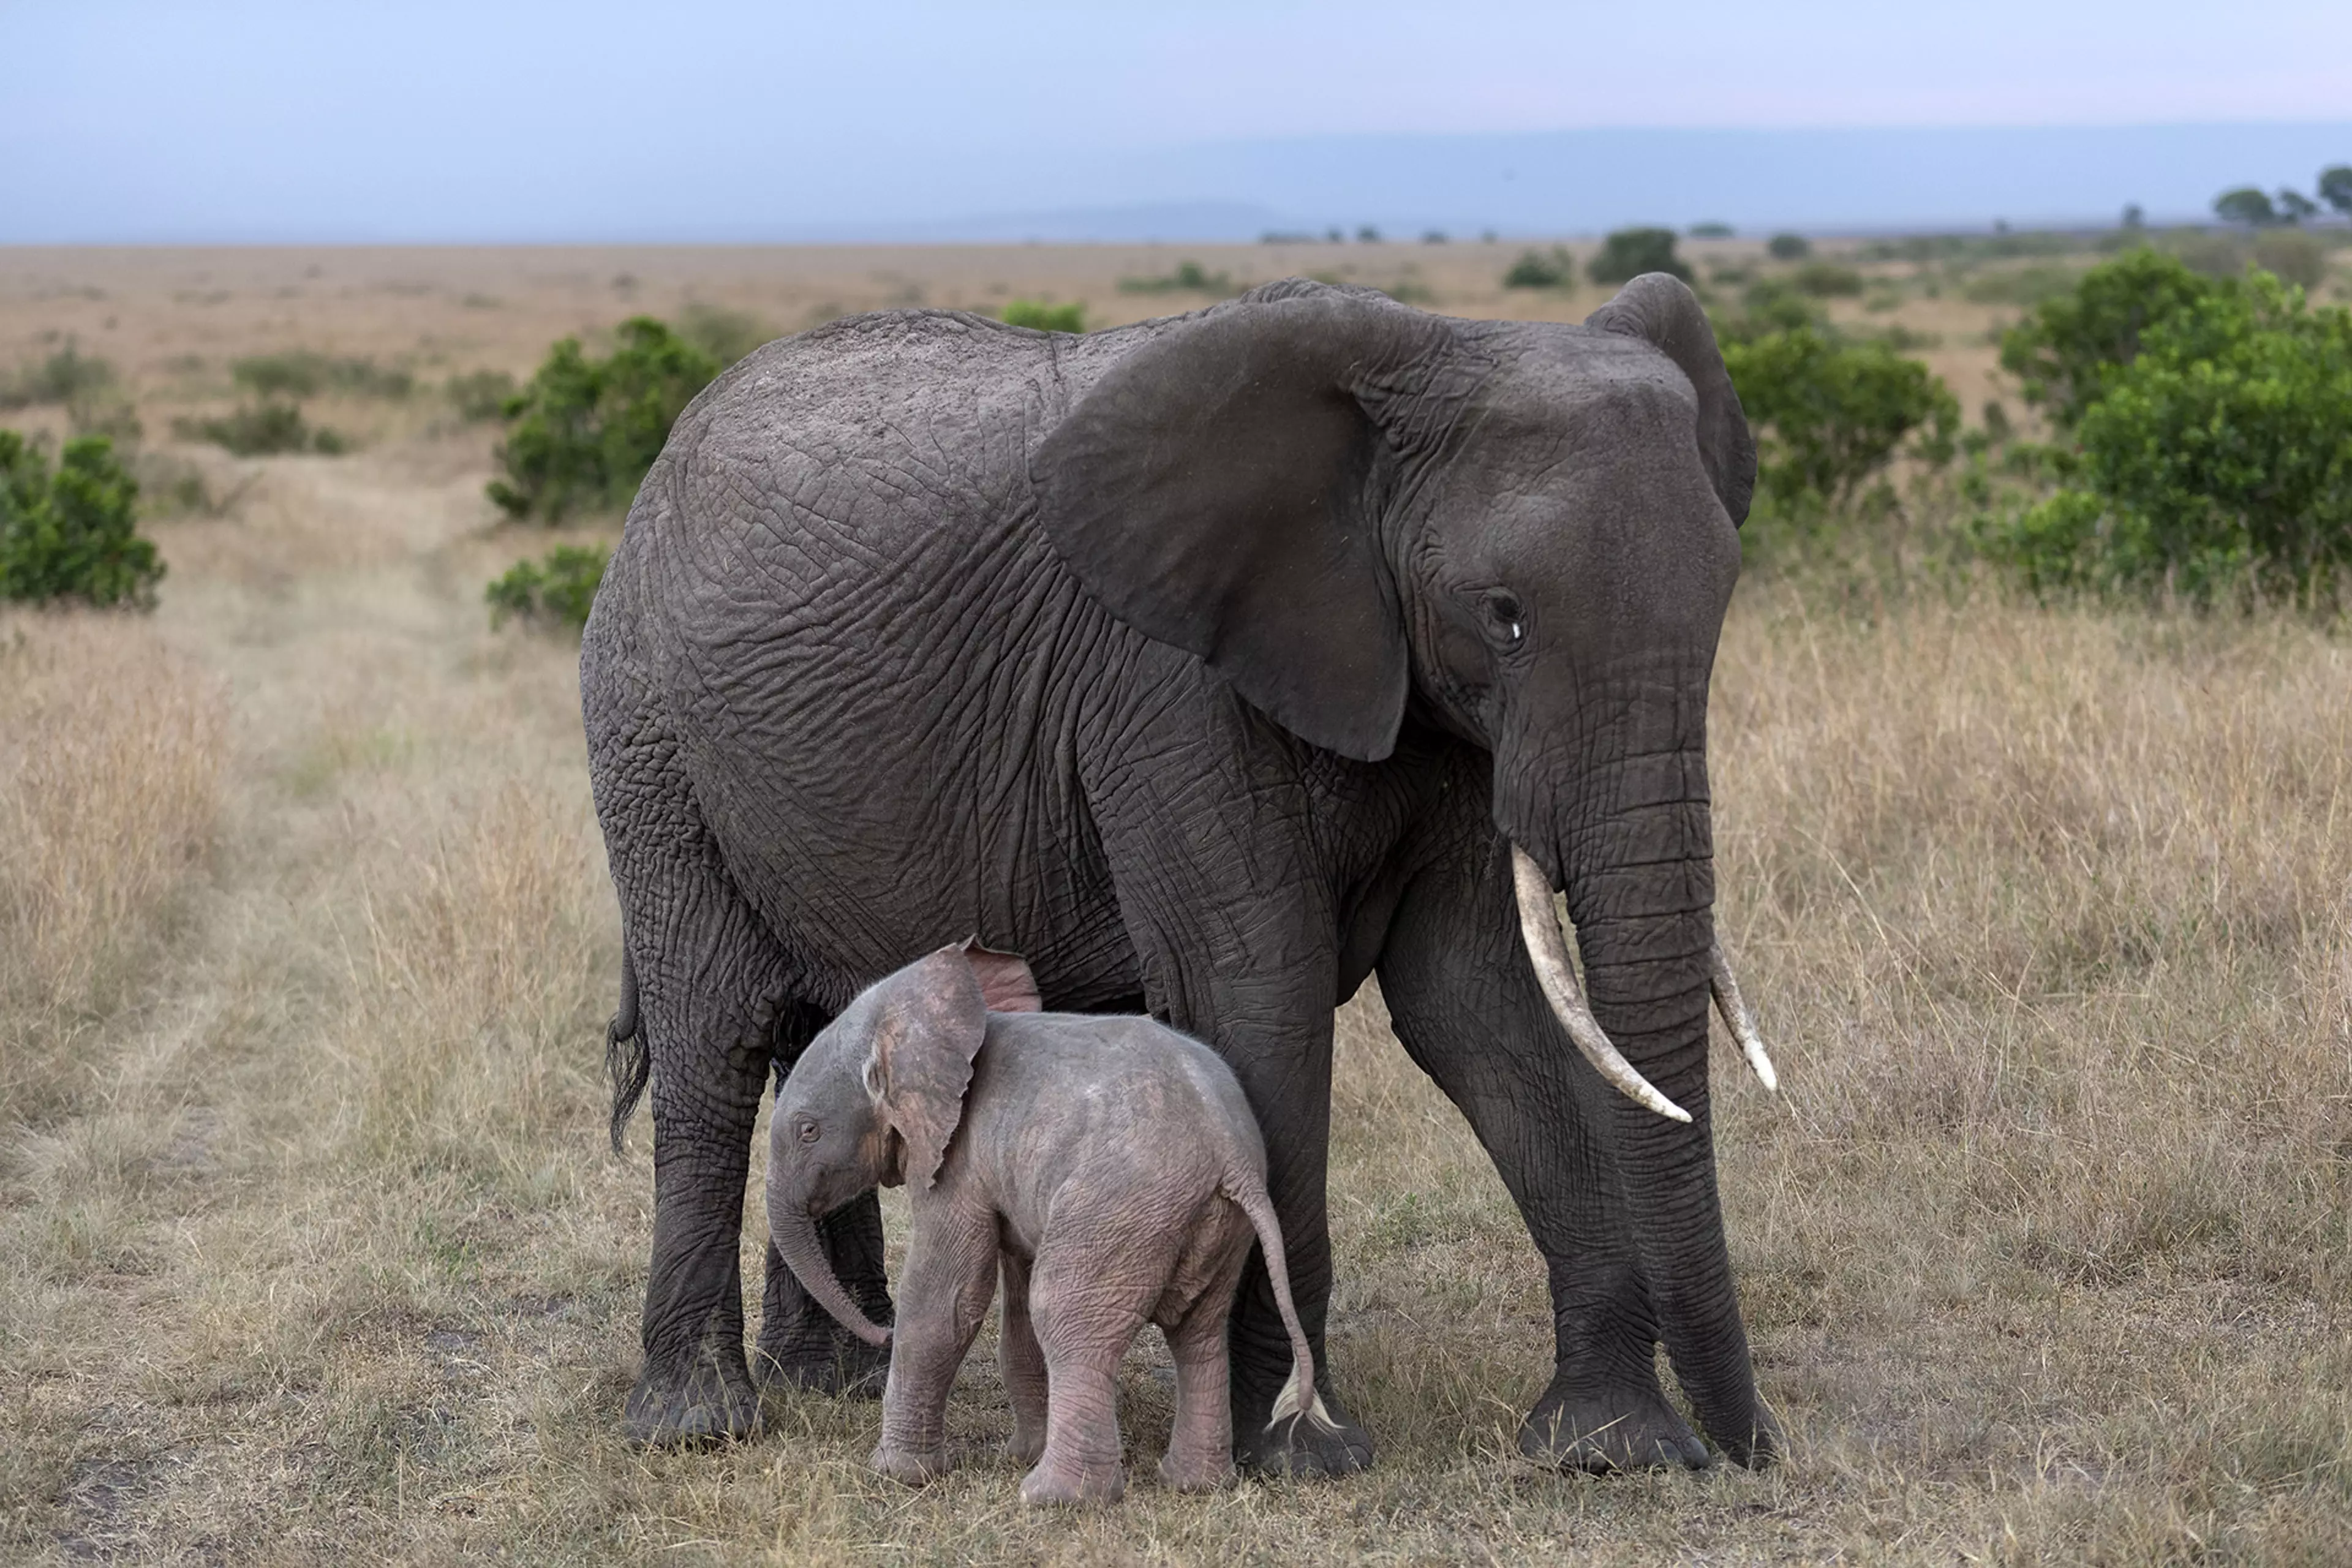 The rare elephant calf was born with albinism to a wild elephant in Masai Mara, Kenya in April this year. (